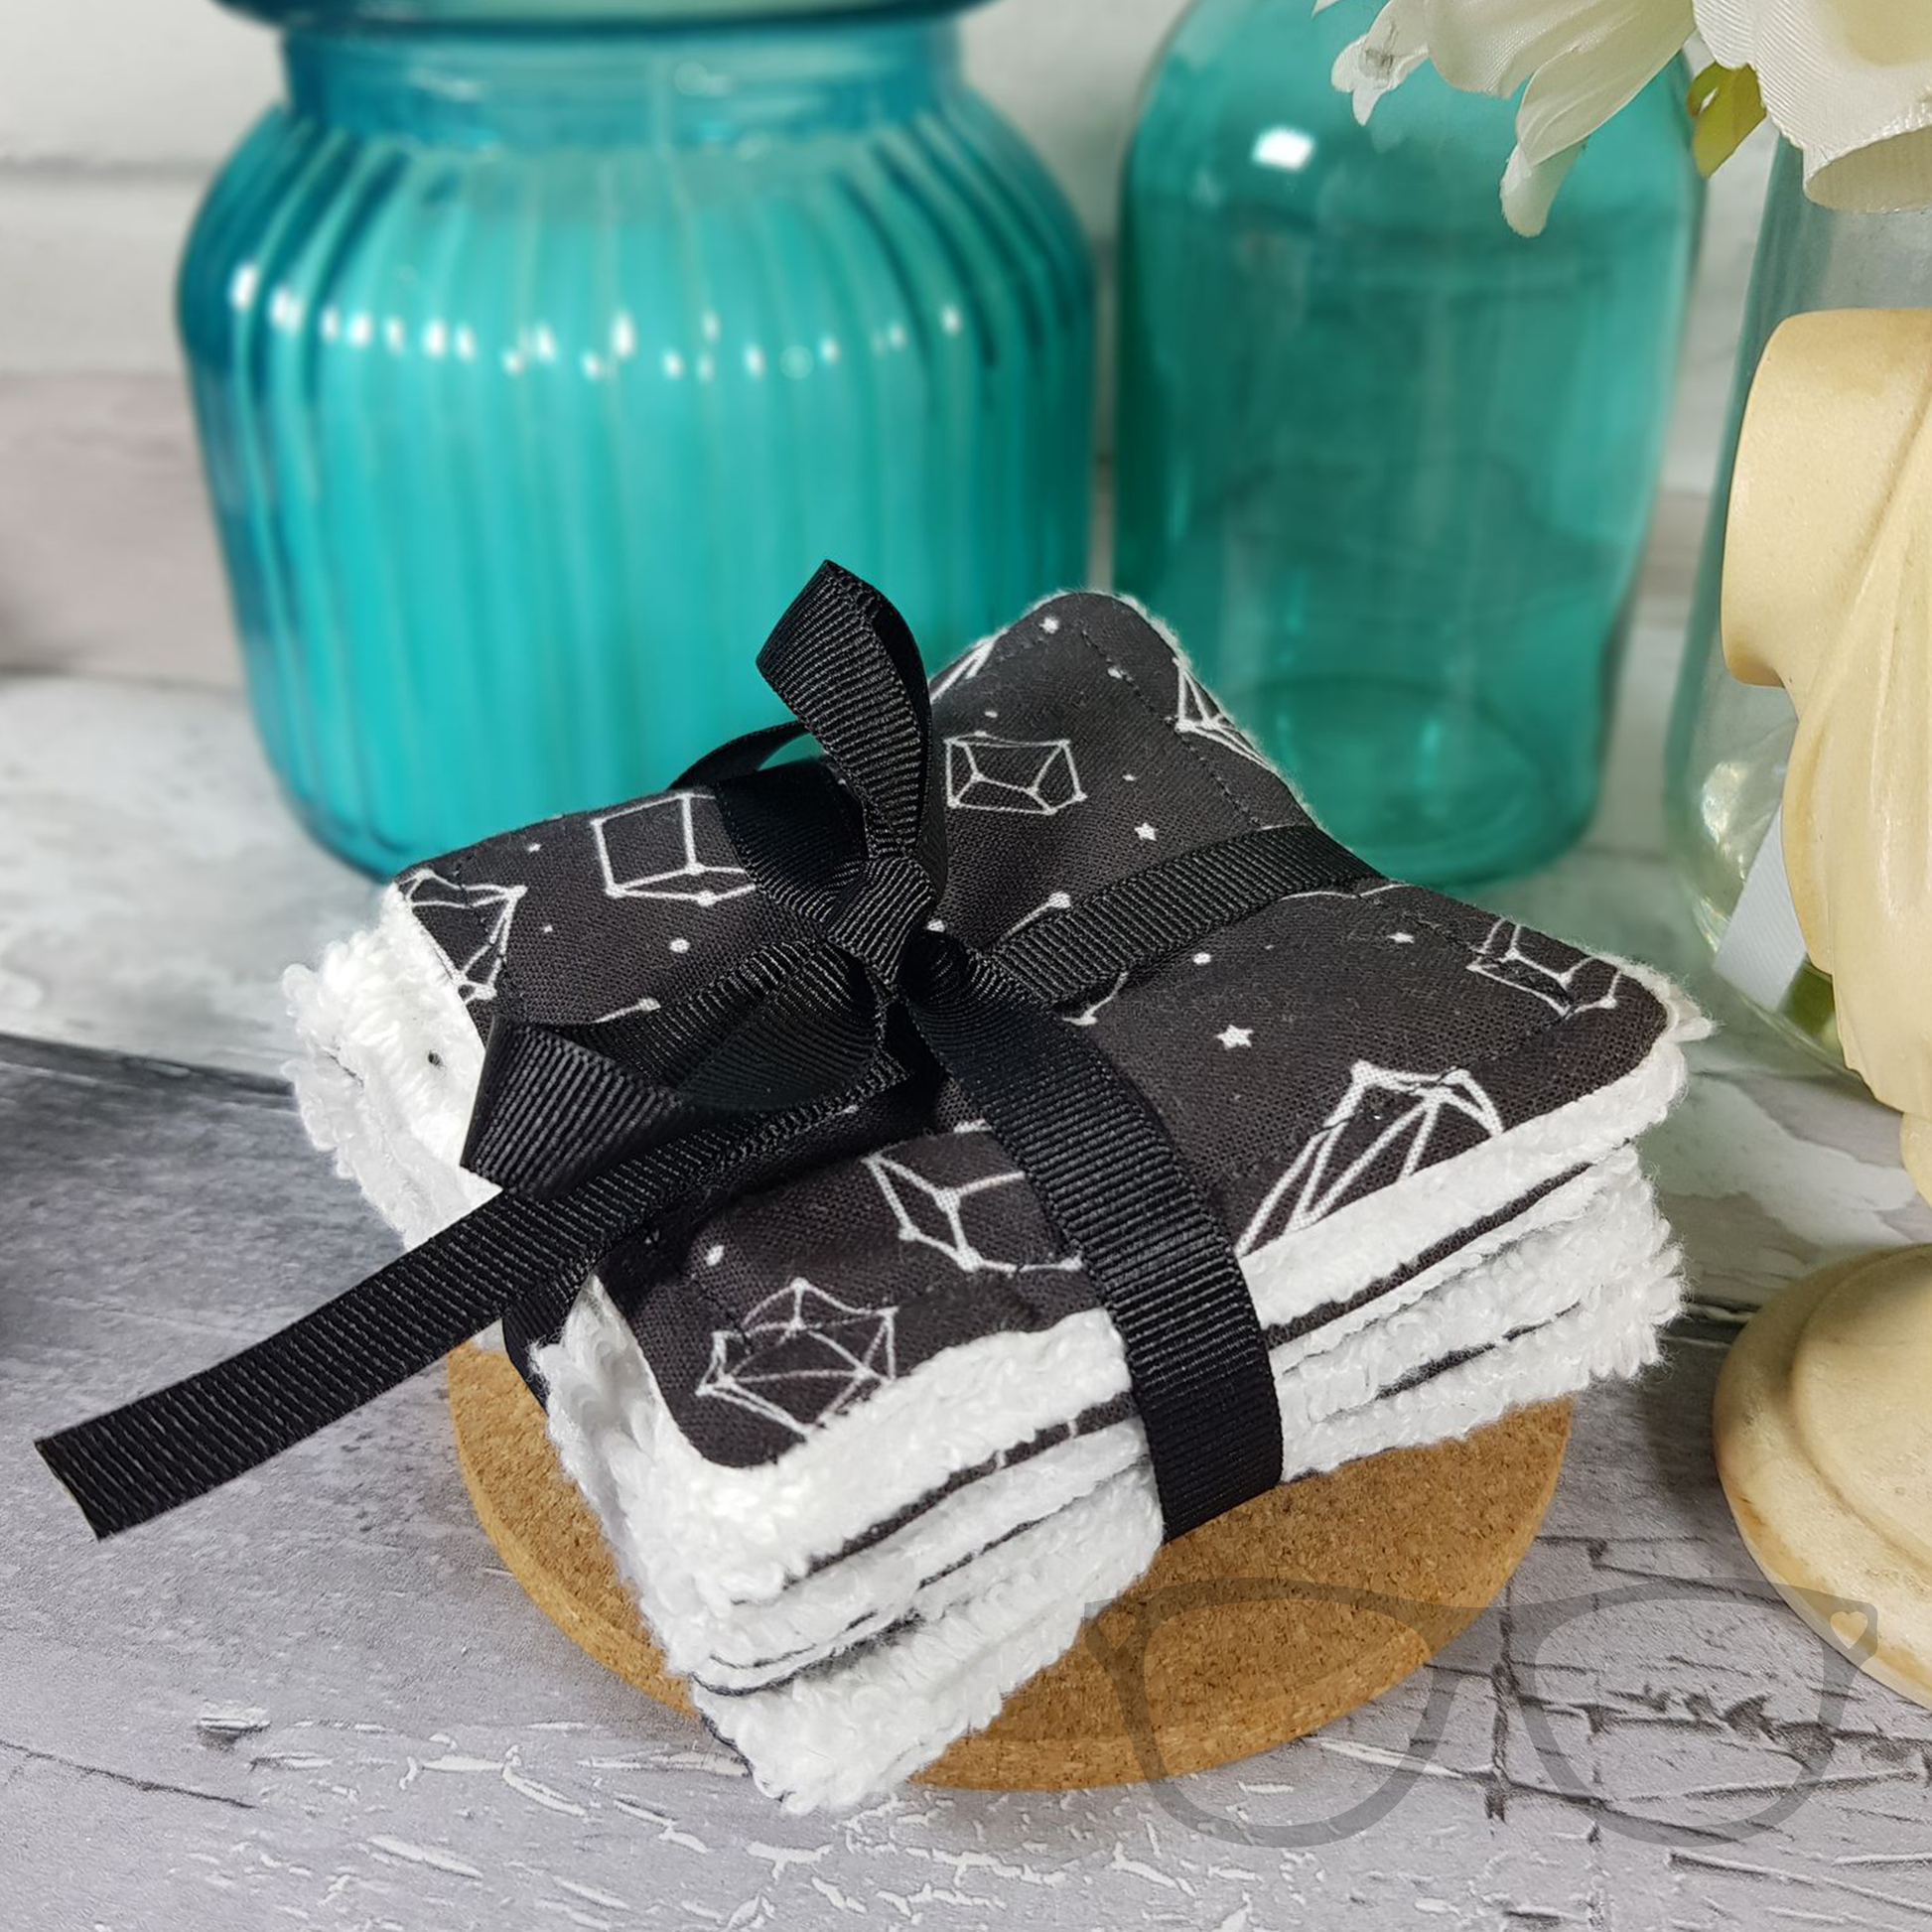 Square reusable face wipes in black fabric tied in a black ribbon.